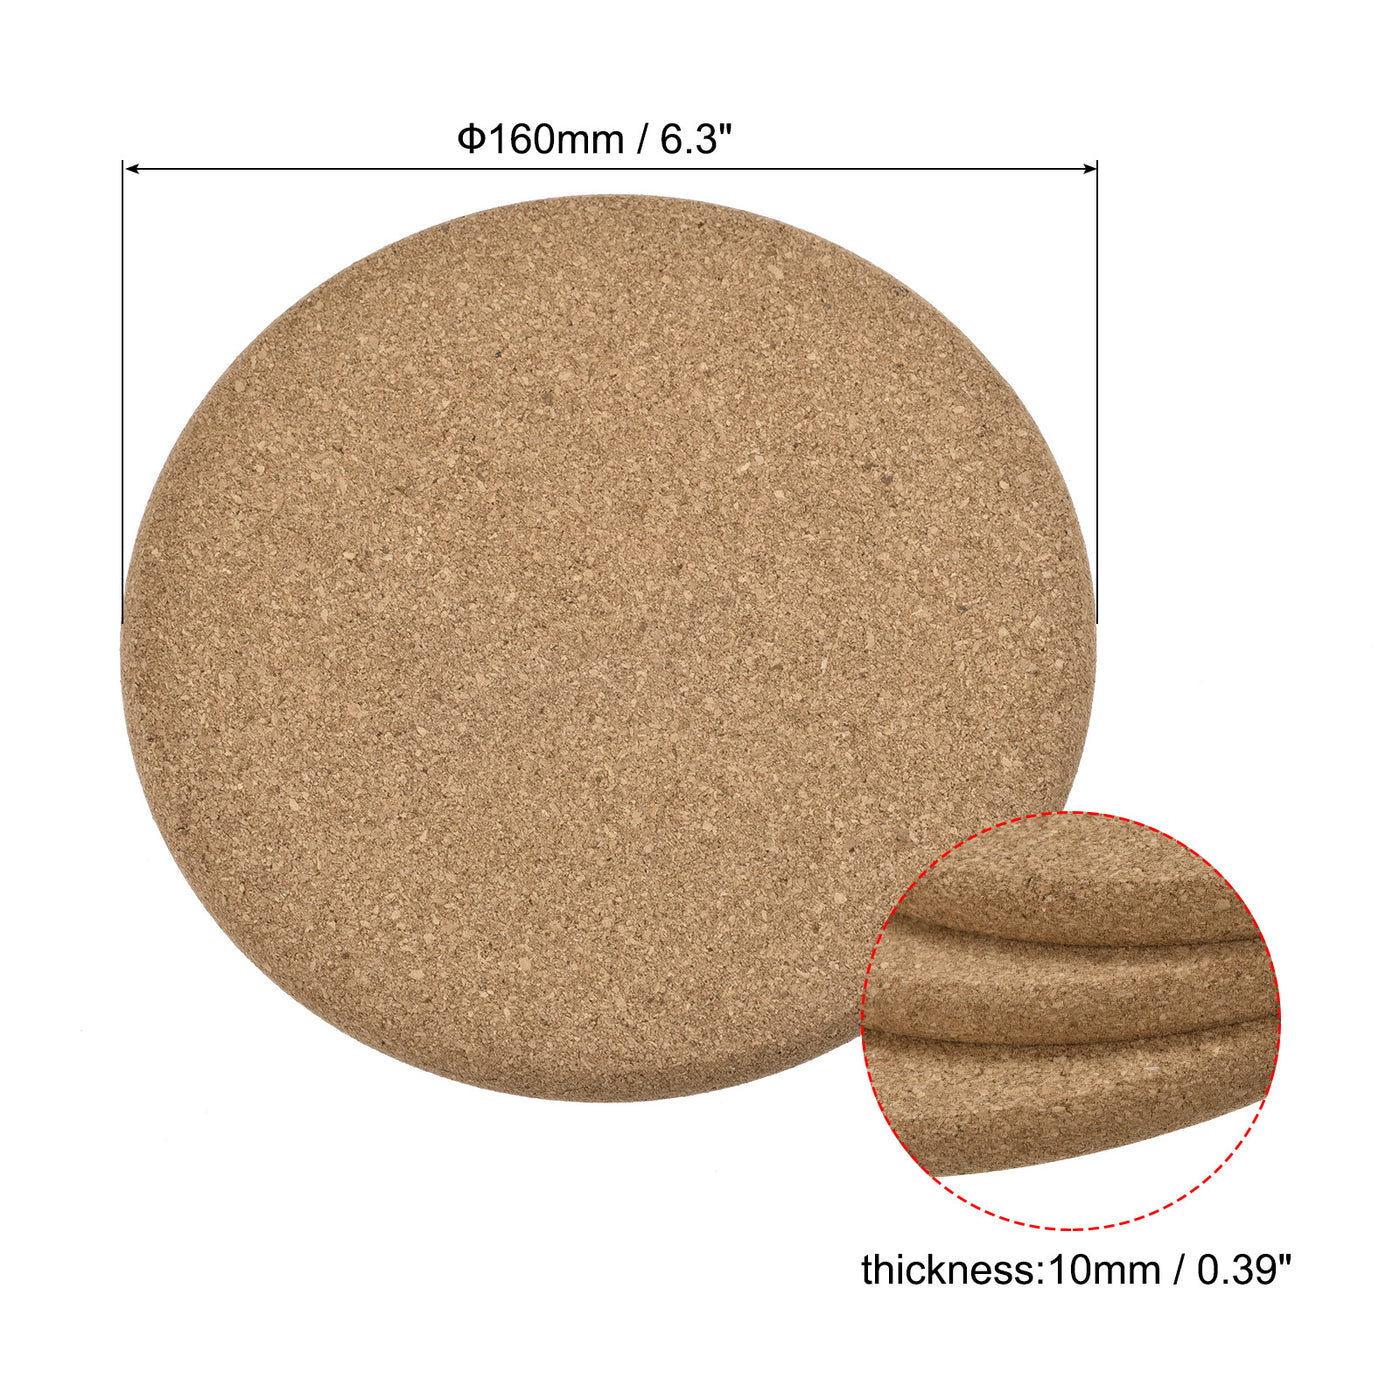 uxcell Uxcell 160mm(6.3") Round Coasters 10mm Thick Cork Cup Mat Pad Round Edge 3pcs